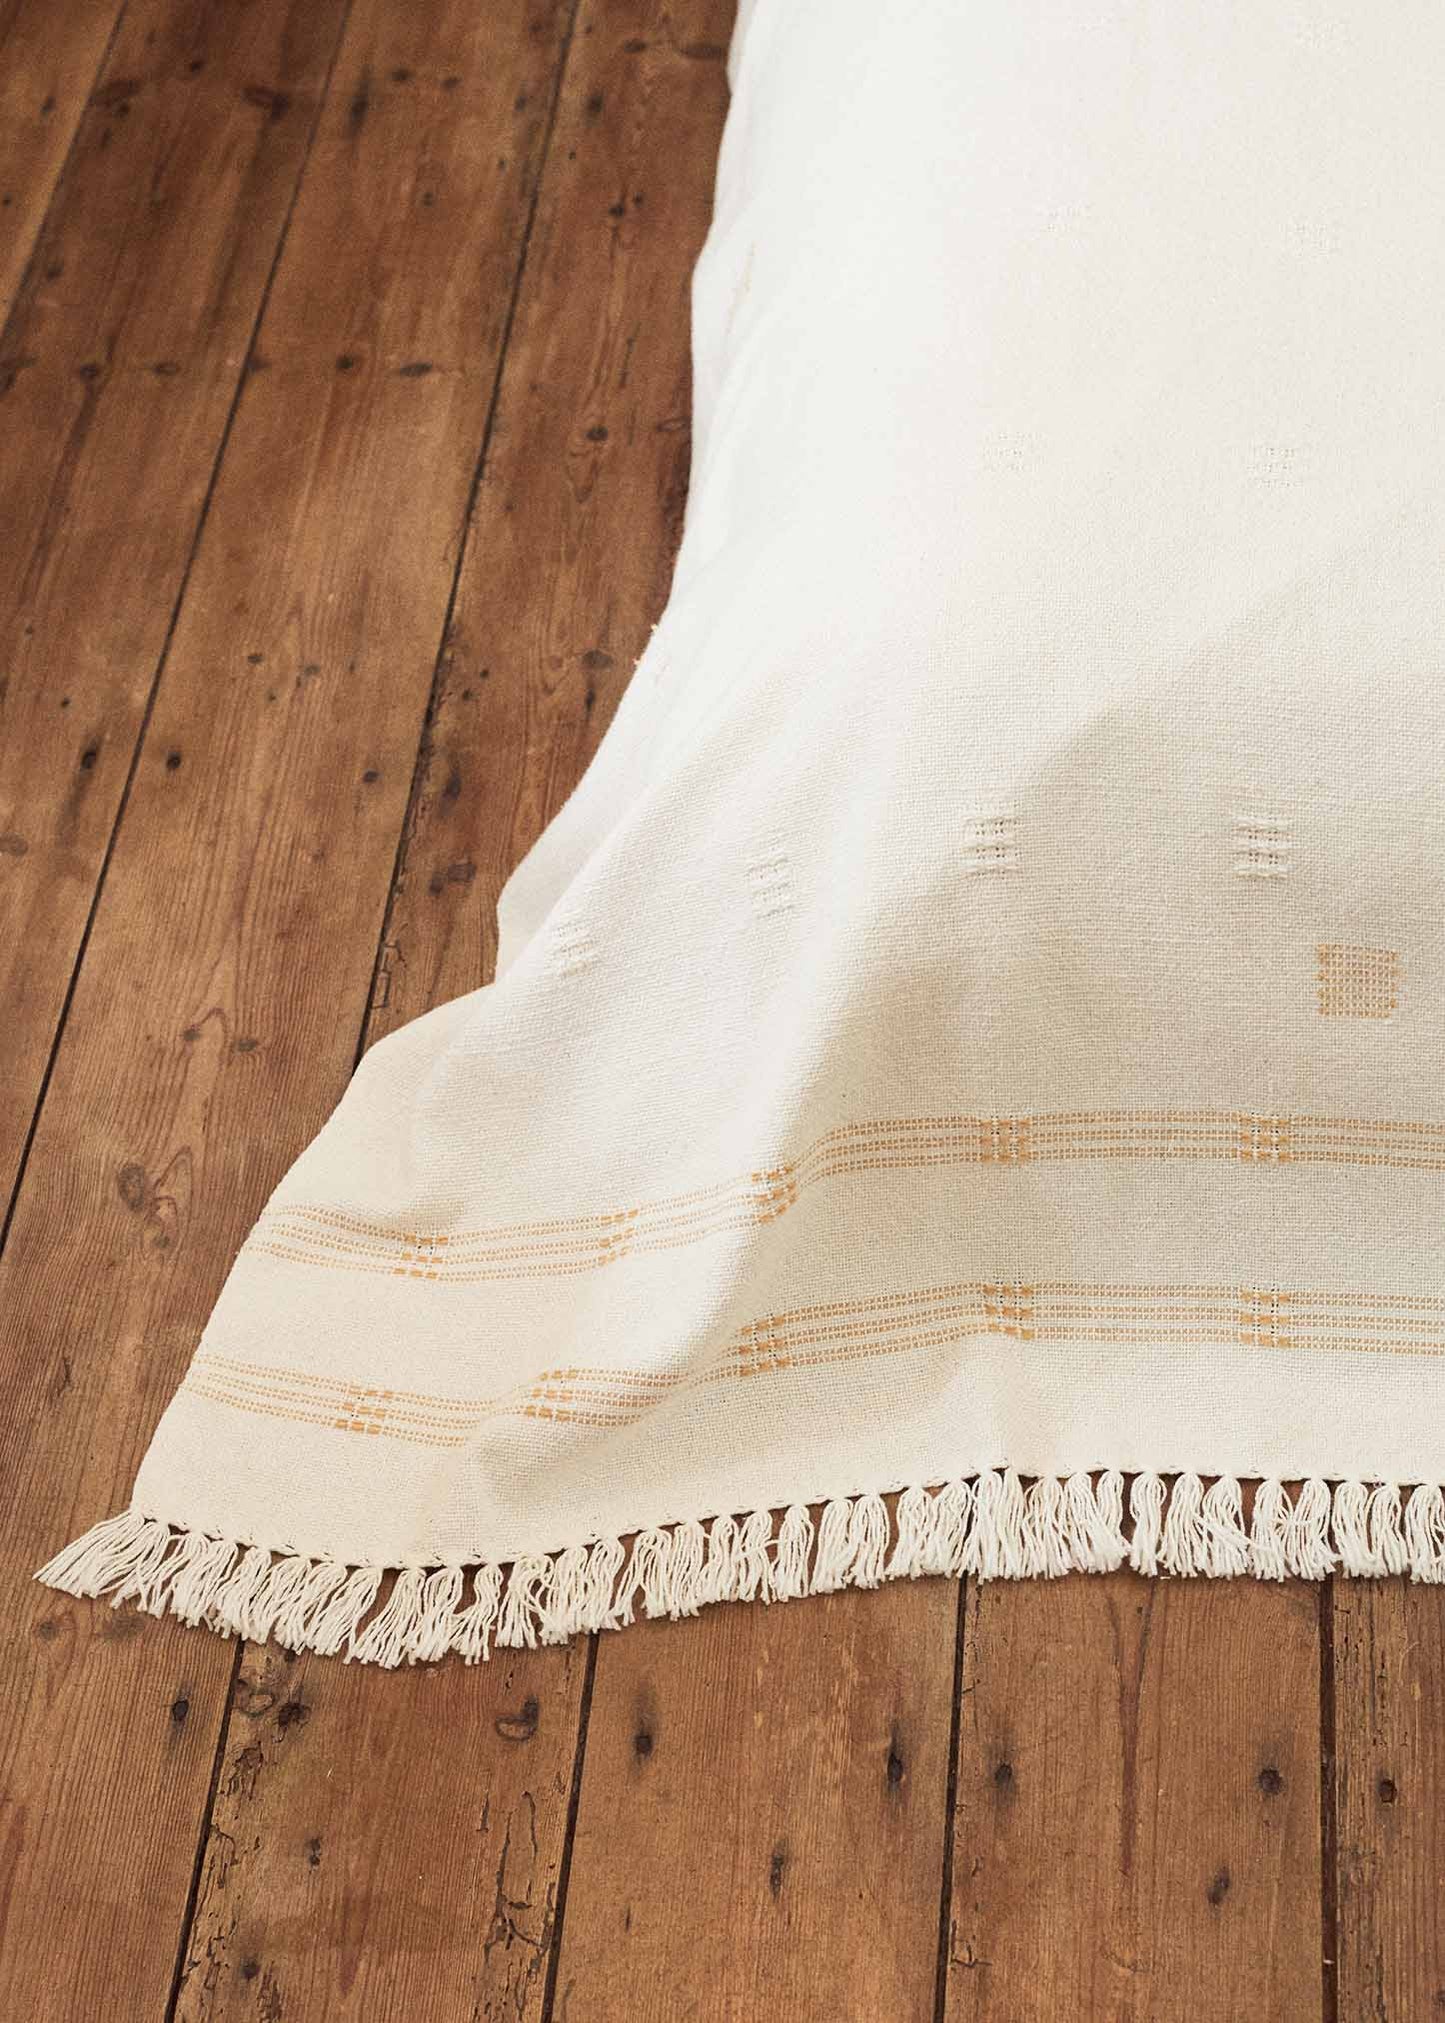 The Spine Blanket, our luxurious handwoven & hand stitched local, natural cotton blanket